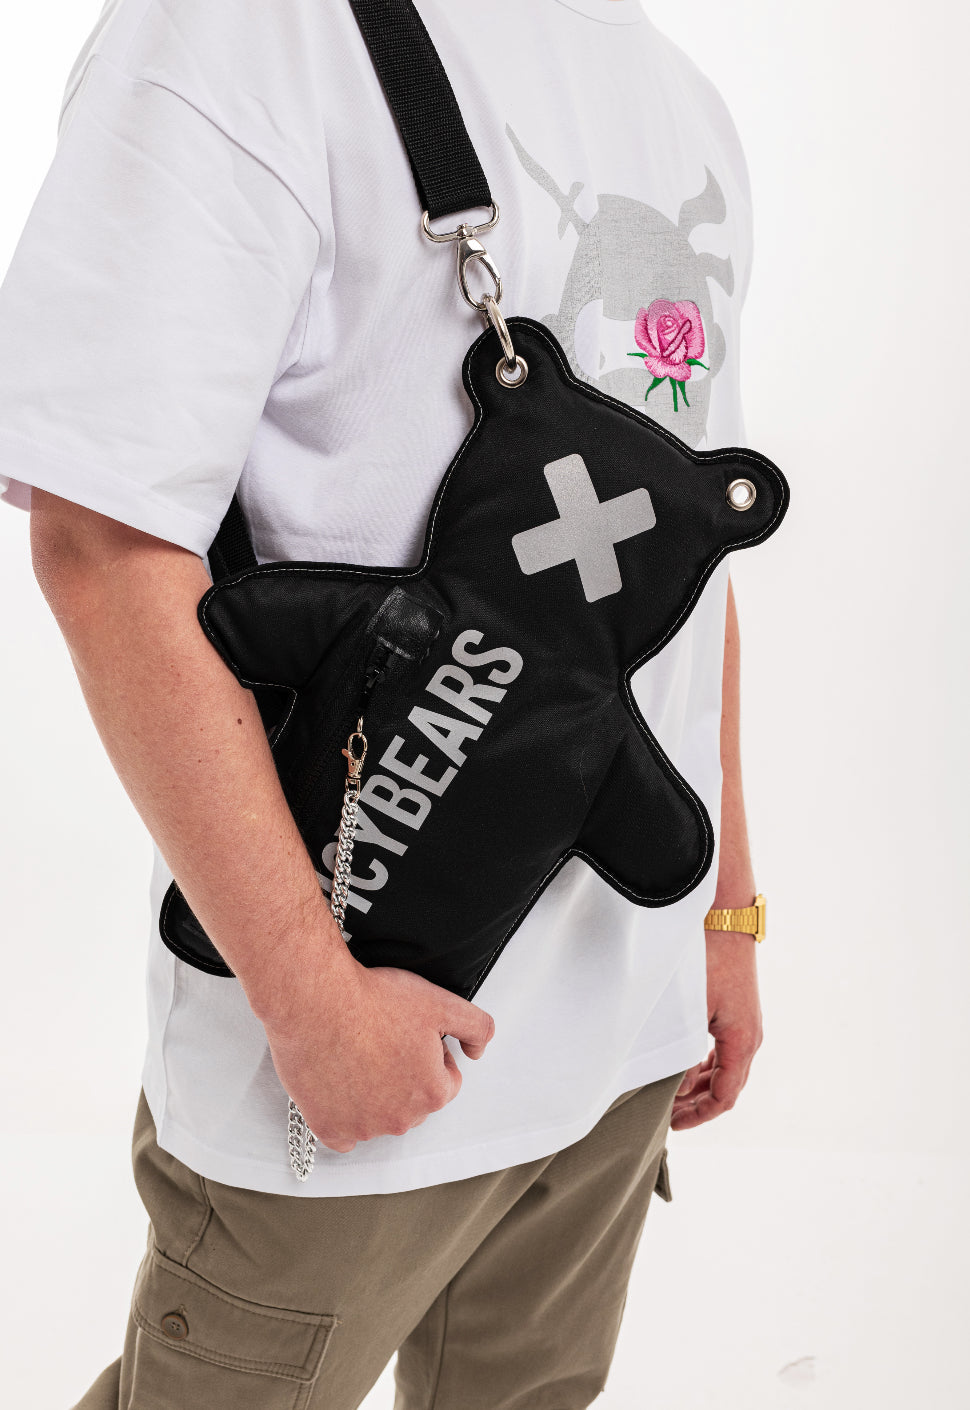 Unisex Street Style with the Reflective Print Black SPICYBEARS Cross-body Bag